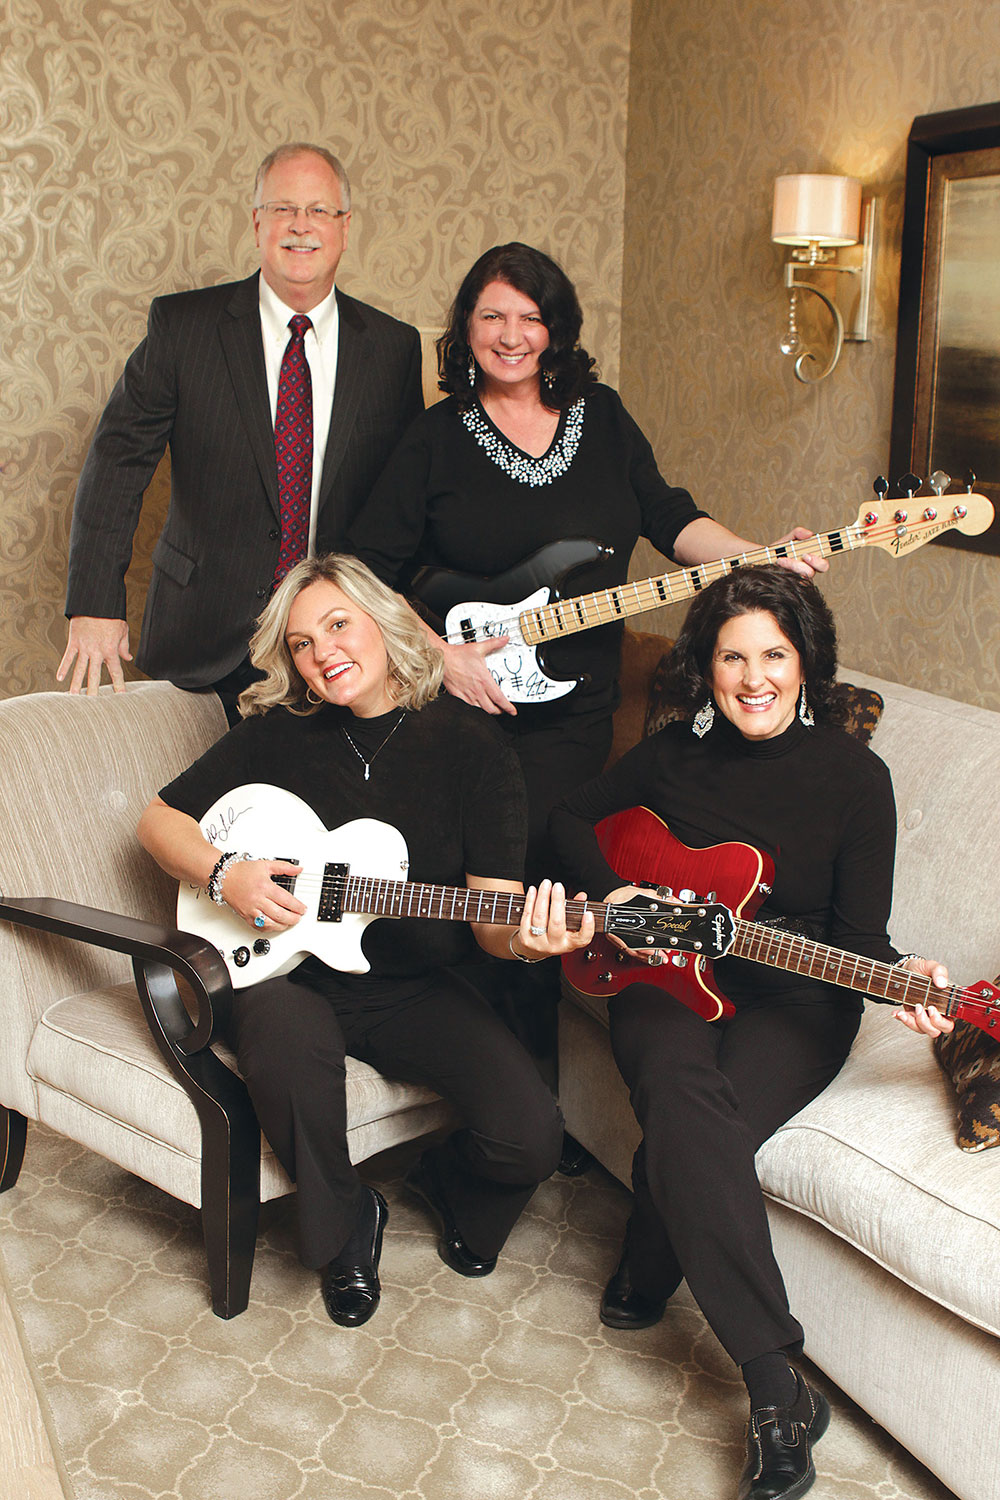 Rob Lowe and his three dental assistants holding electric guitars